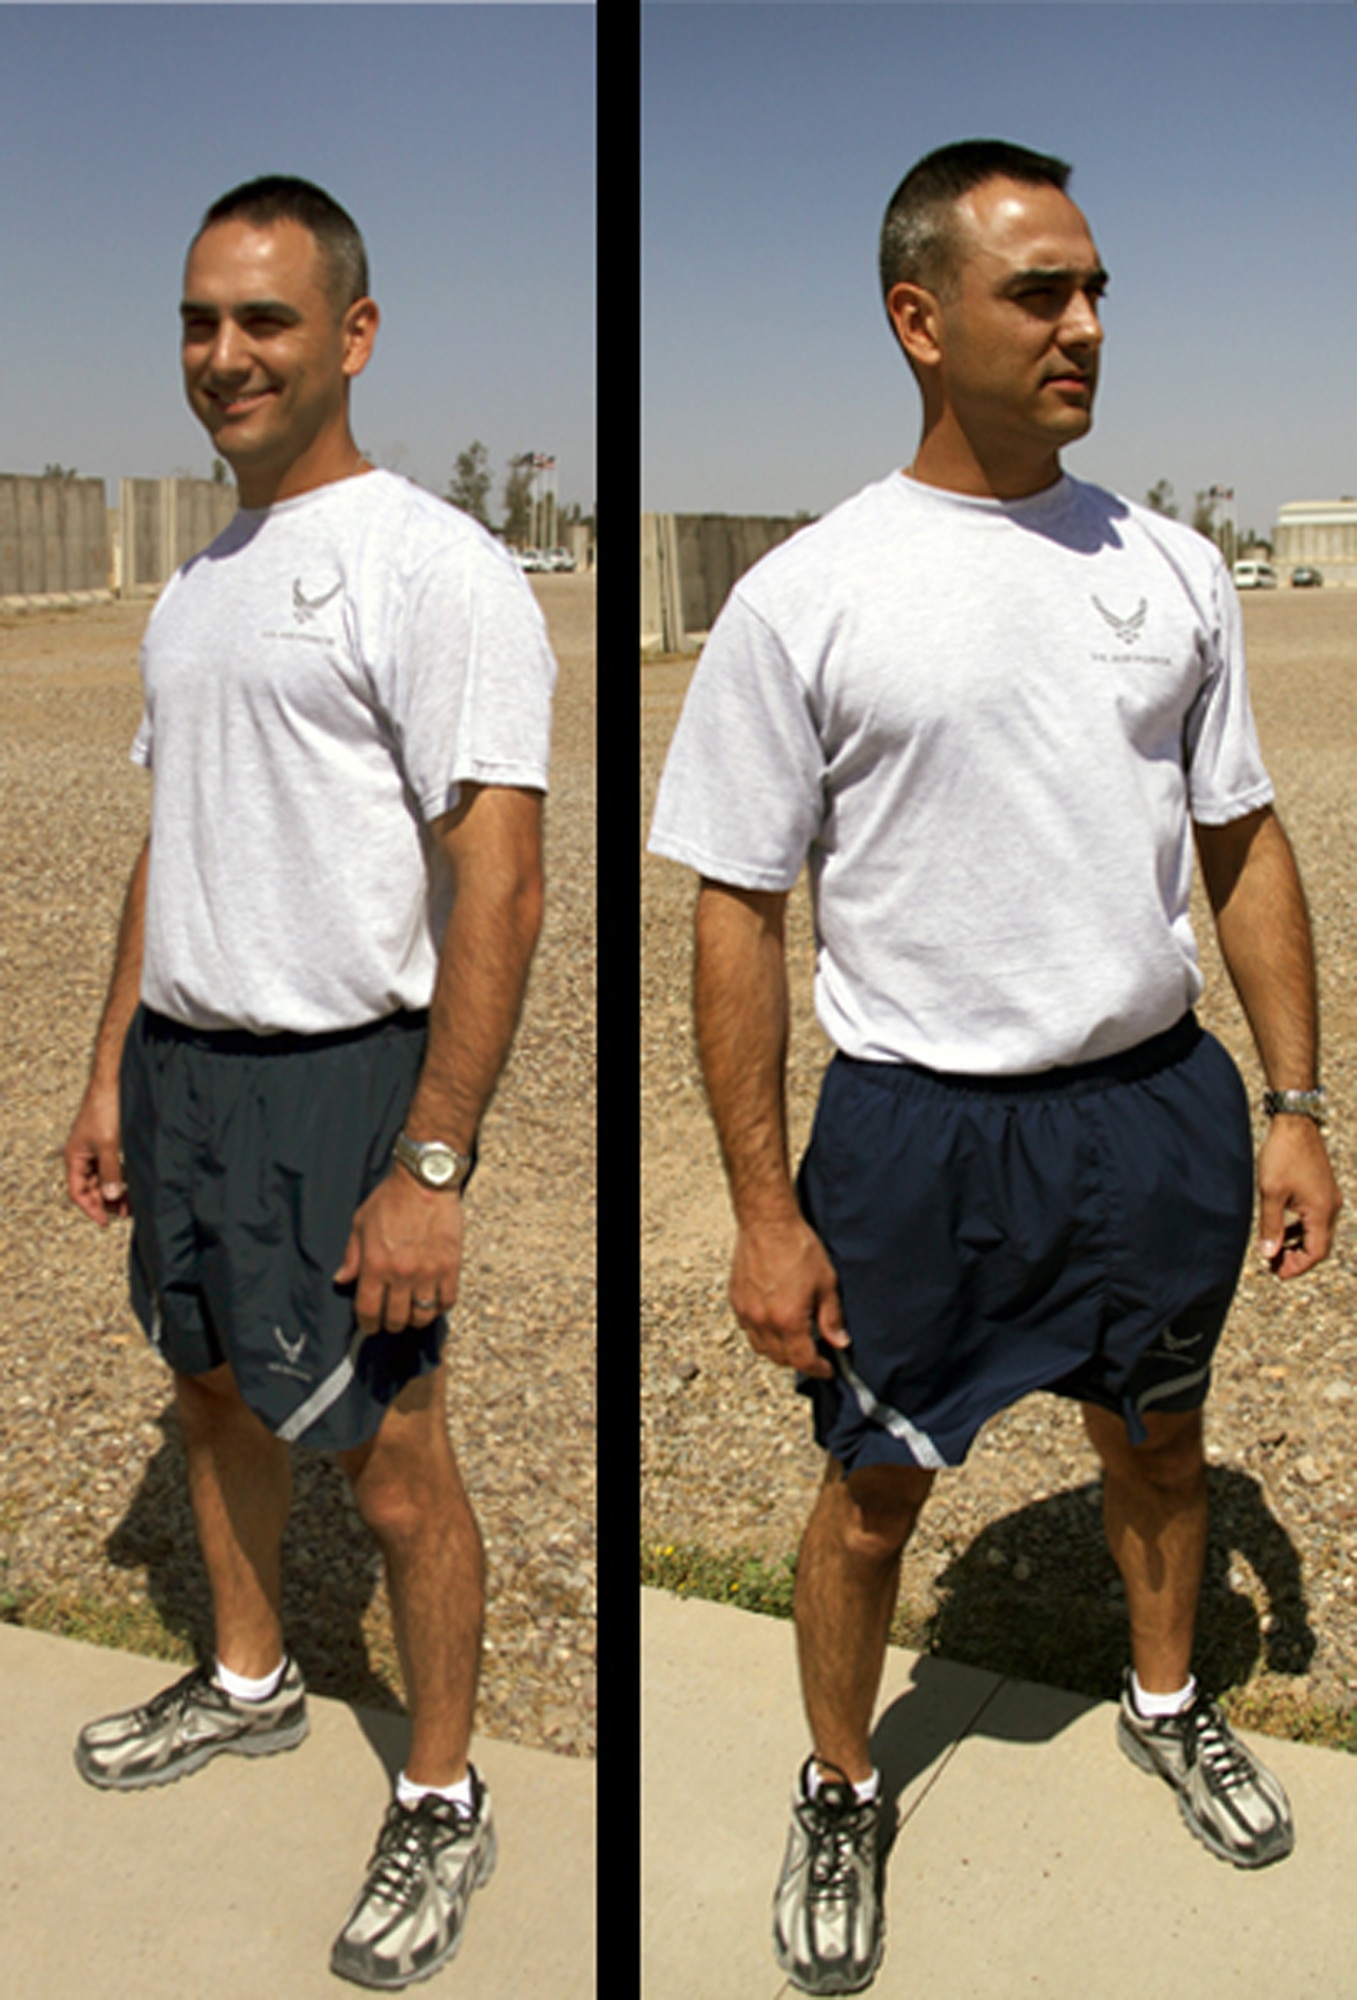 JOINT BASE BALAD, Iraq -- Senior Airman James Debiase, 332nd Expeditionary Civil Engineer Squadron emergency manager, displays the current physical training uniform (left) and the modified PT uniform (right) here April 13. Airman Debiase was selected to field-test the modified PT uniform while deployed here from Dyess Air Force Base, Texas, and to provide feedback to leadership at the end of April. Sergeant Debiase's hometown is Glastonbury, Conn. (U.S. Air Force photo illustration/Tech. Sgt. Lionel Castellano)